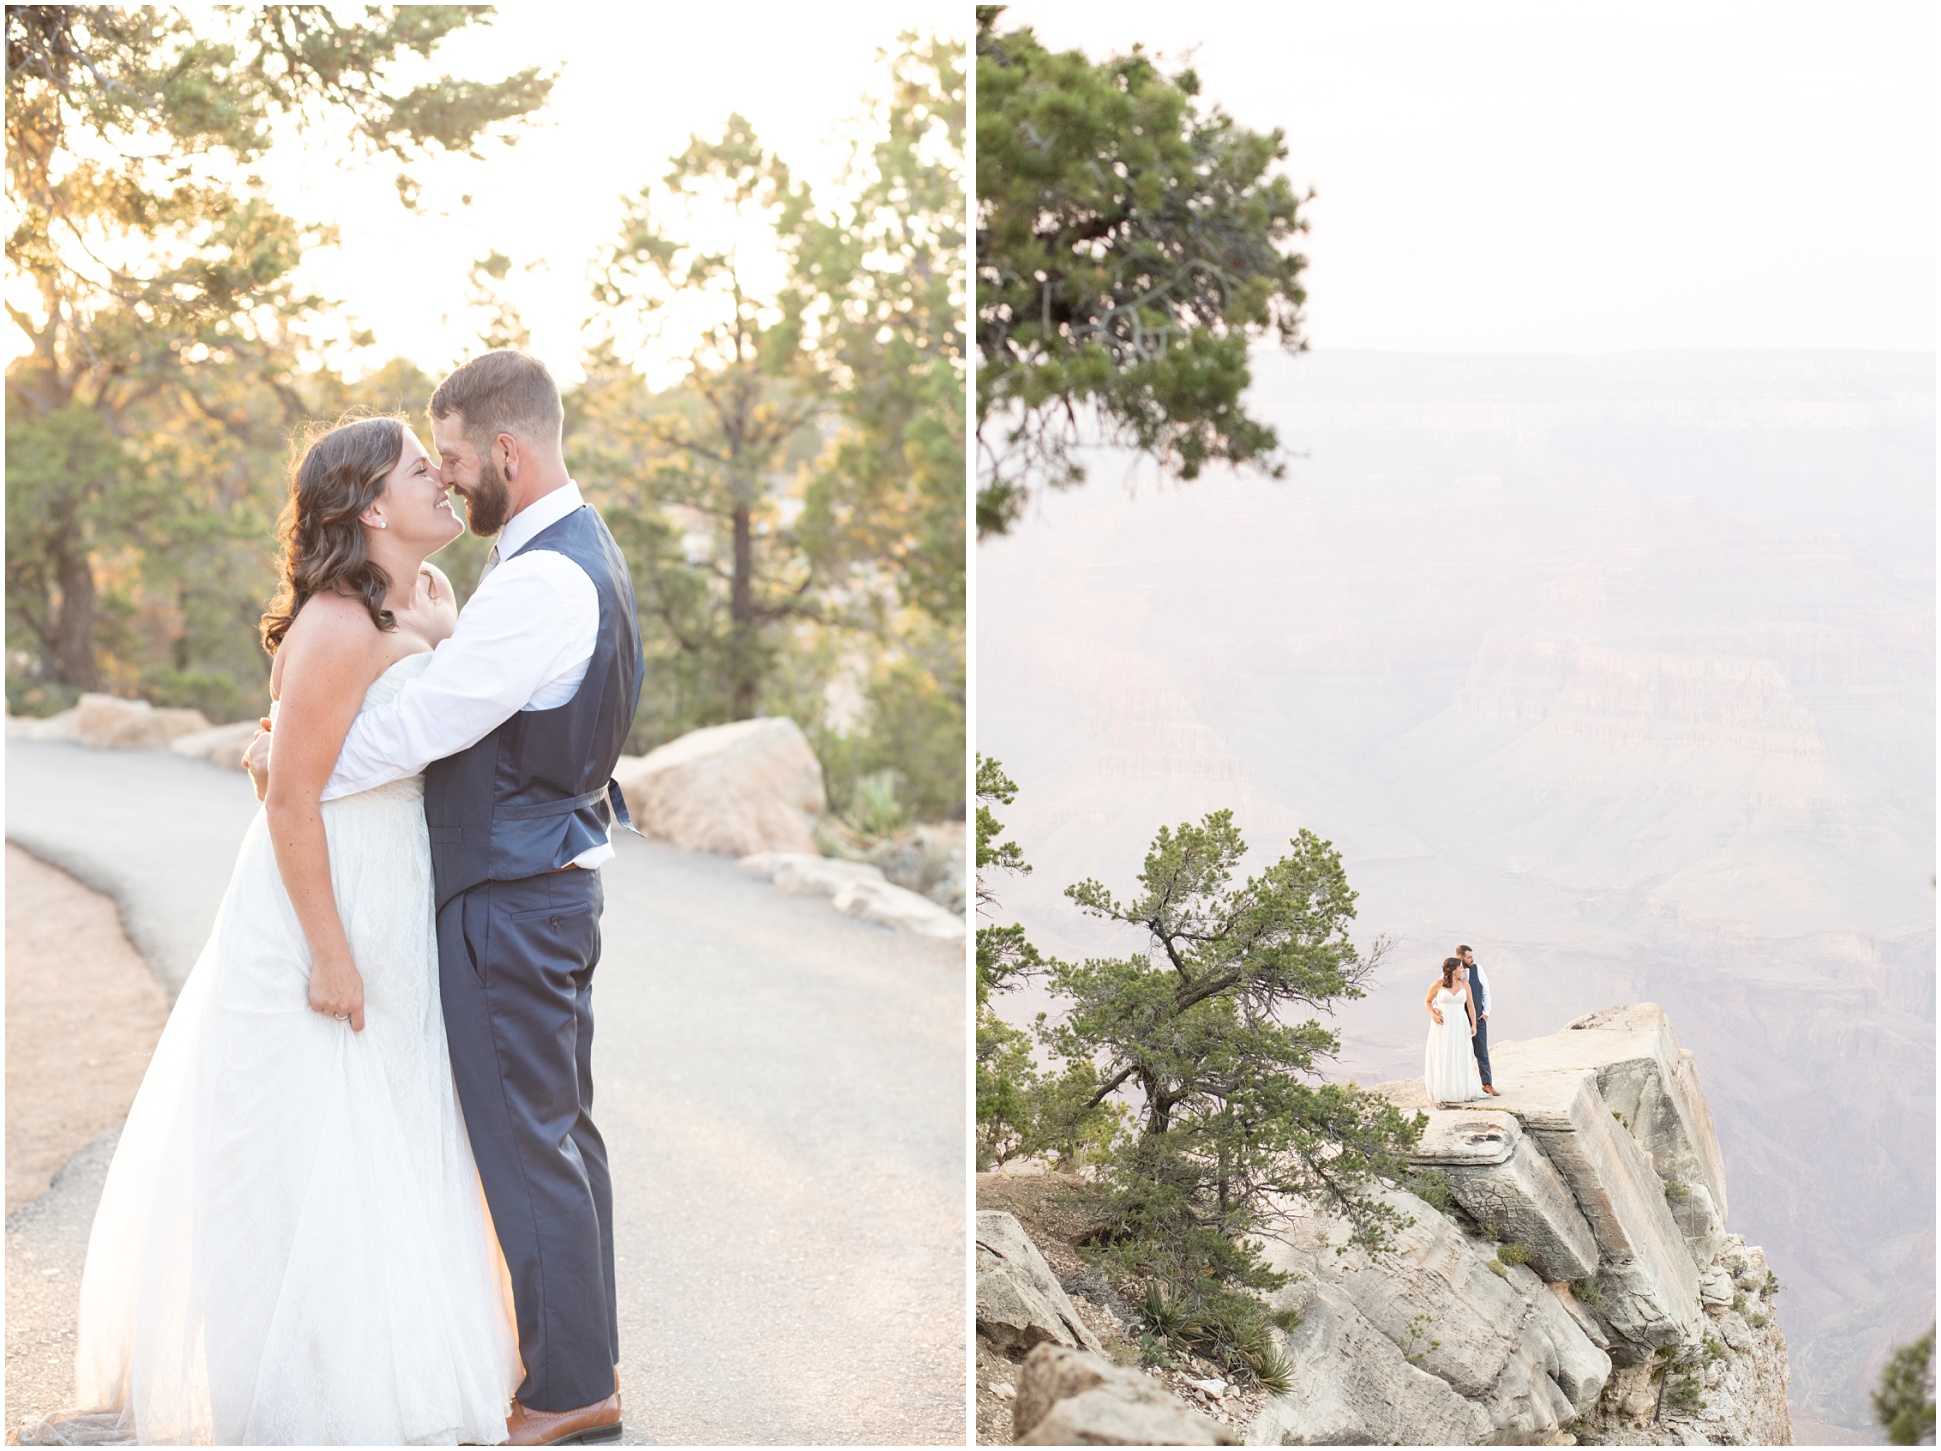 Sunset Wedding Portraits at the Grand Canyon - Bride and Groom. Left Photo is close up, right photo is far away